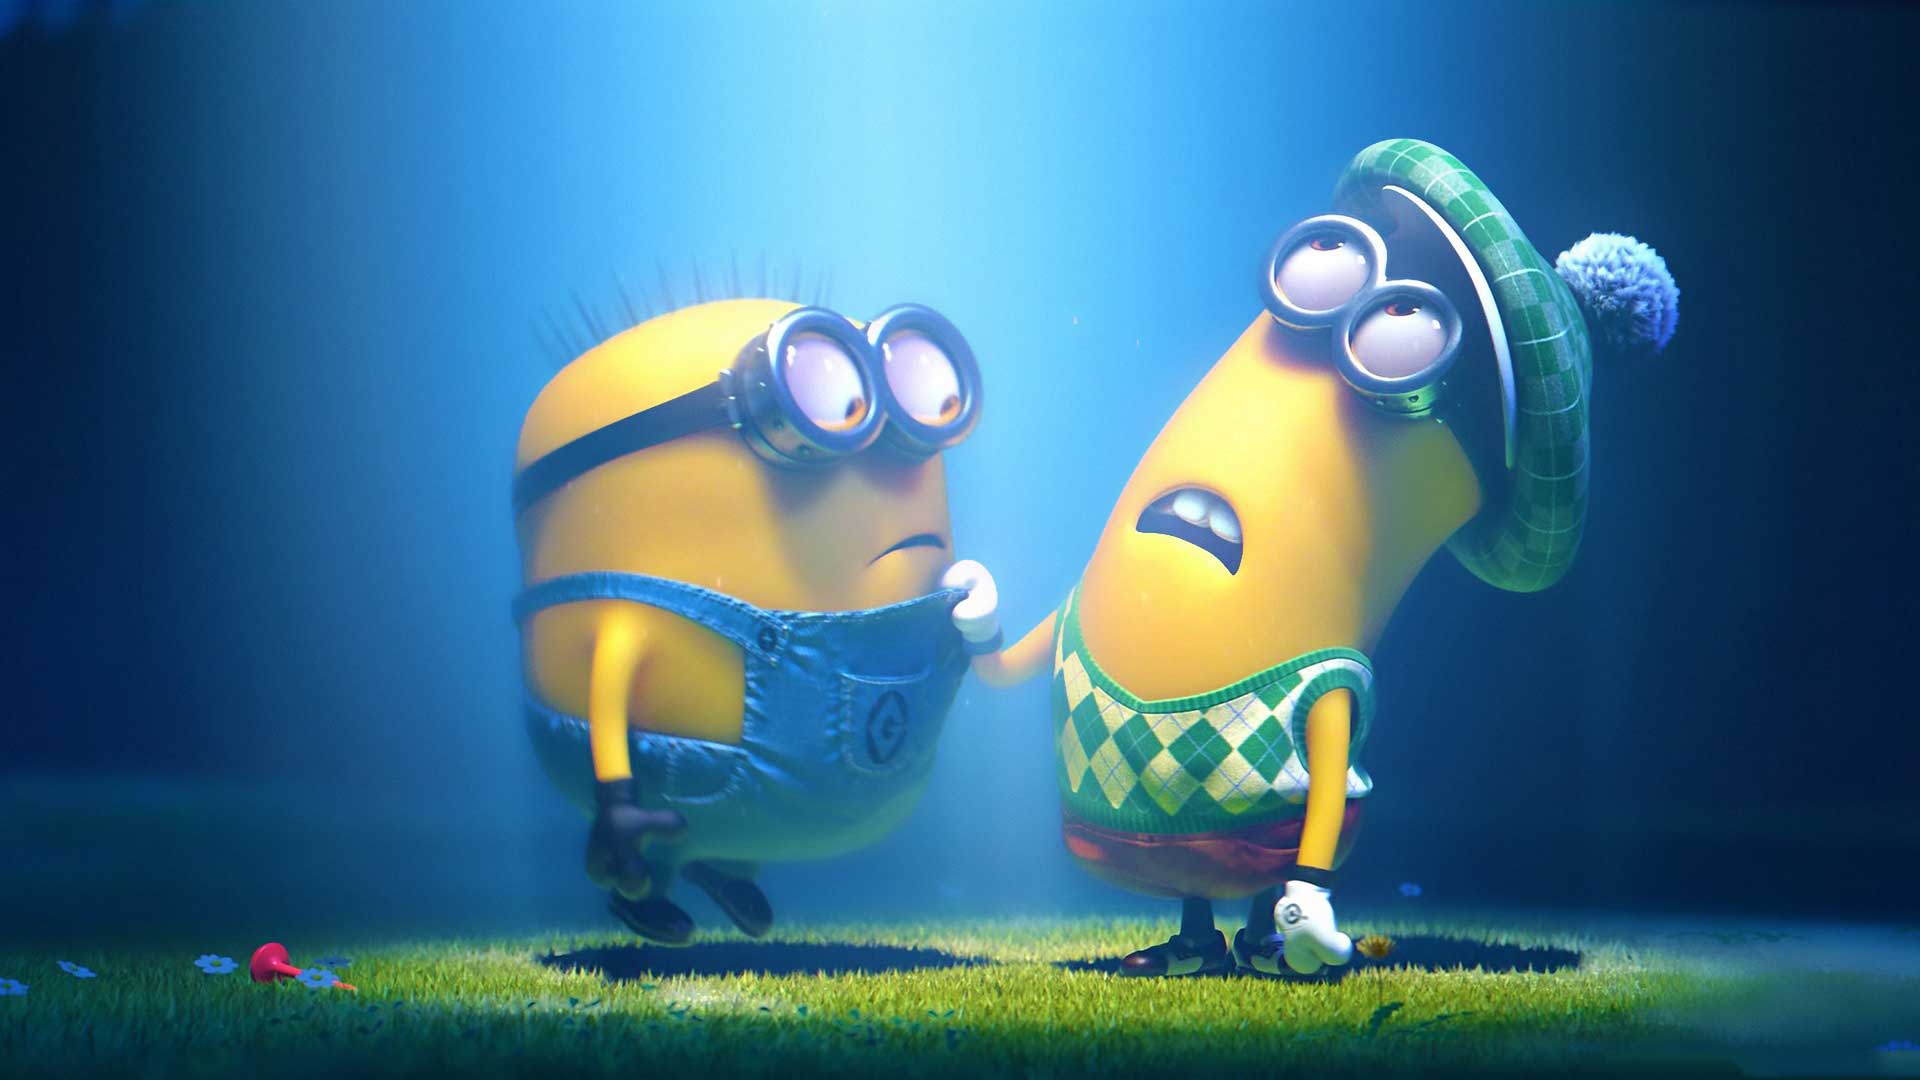 Cute-Minions-Wallpapers-Collection-008.jpg